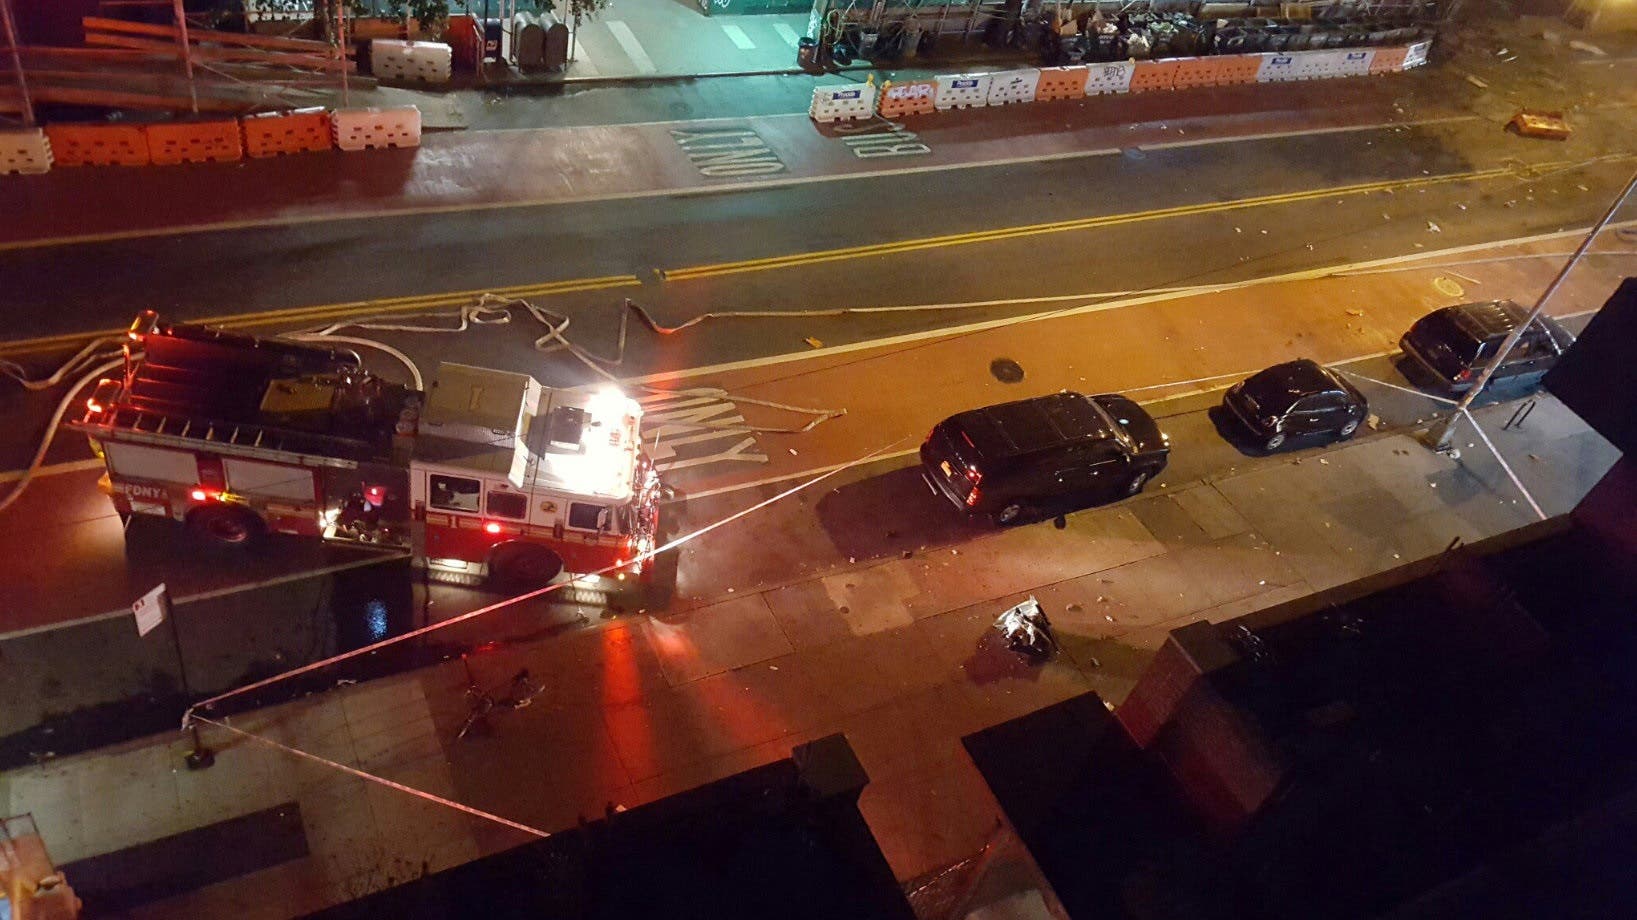 Fire rescue crews block off the street near the scene of an explosion in the Chelsea neighbourhood of New York, U.S. in this September 17, 2016 handout photo obtained via Twitter. Neha Jain via Twitter/Handout via REUTERS